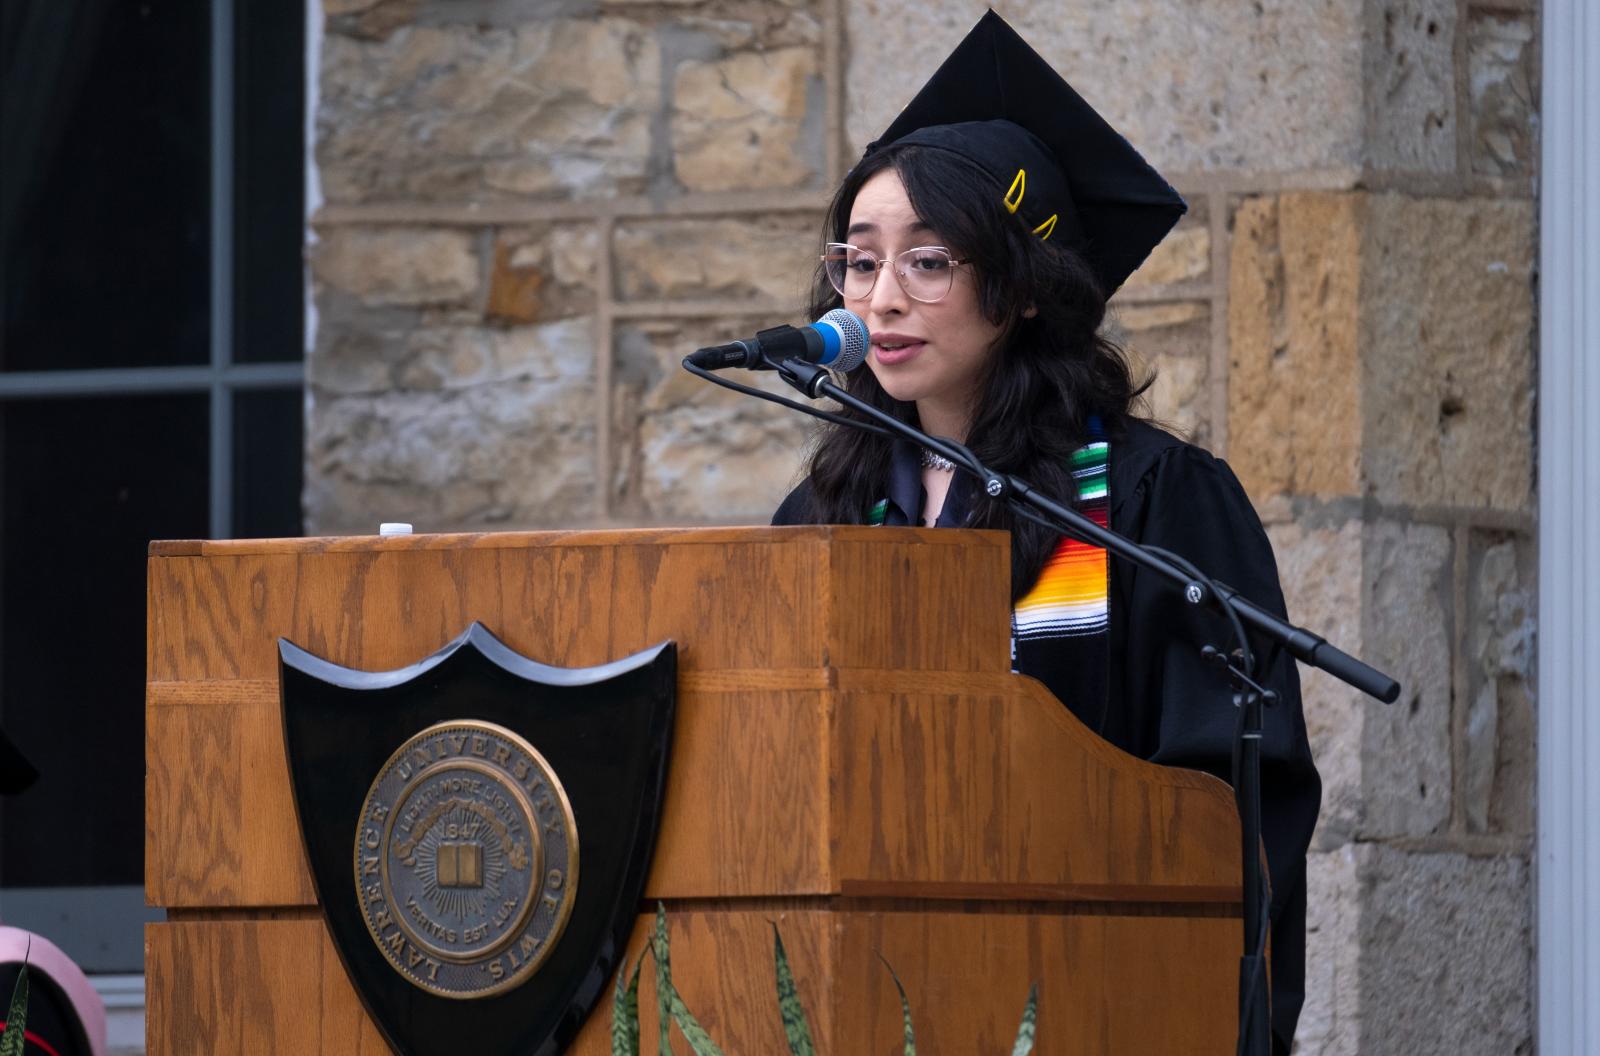 Samantha Torres is delivers her senior class speech at a podium wearing a graduation cap and gown.